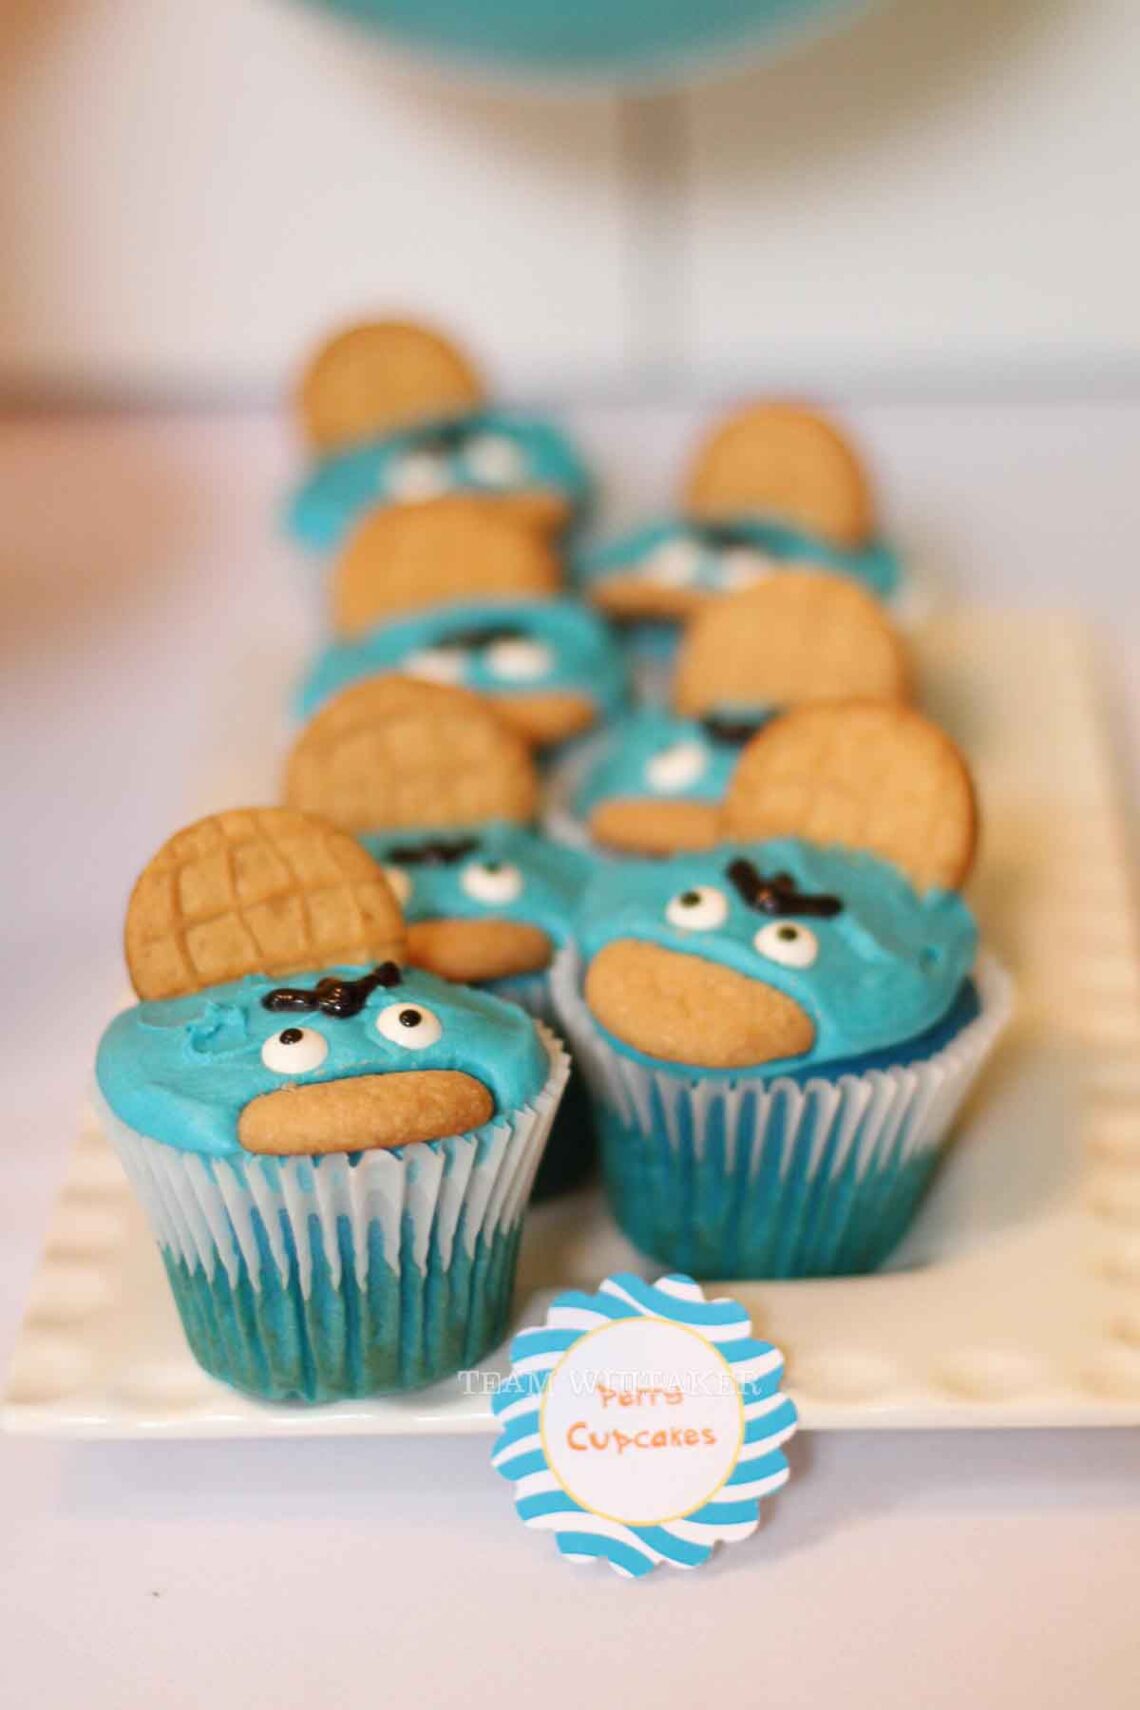 Phineas and Ferb Cupcakes (Credit: kathrynwhitaker)